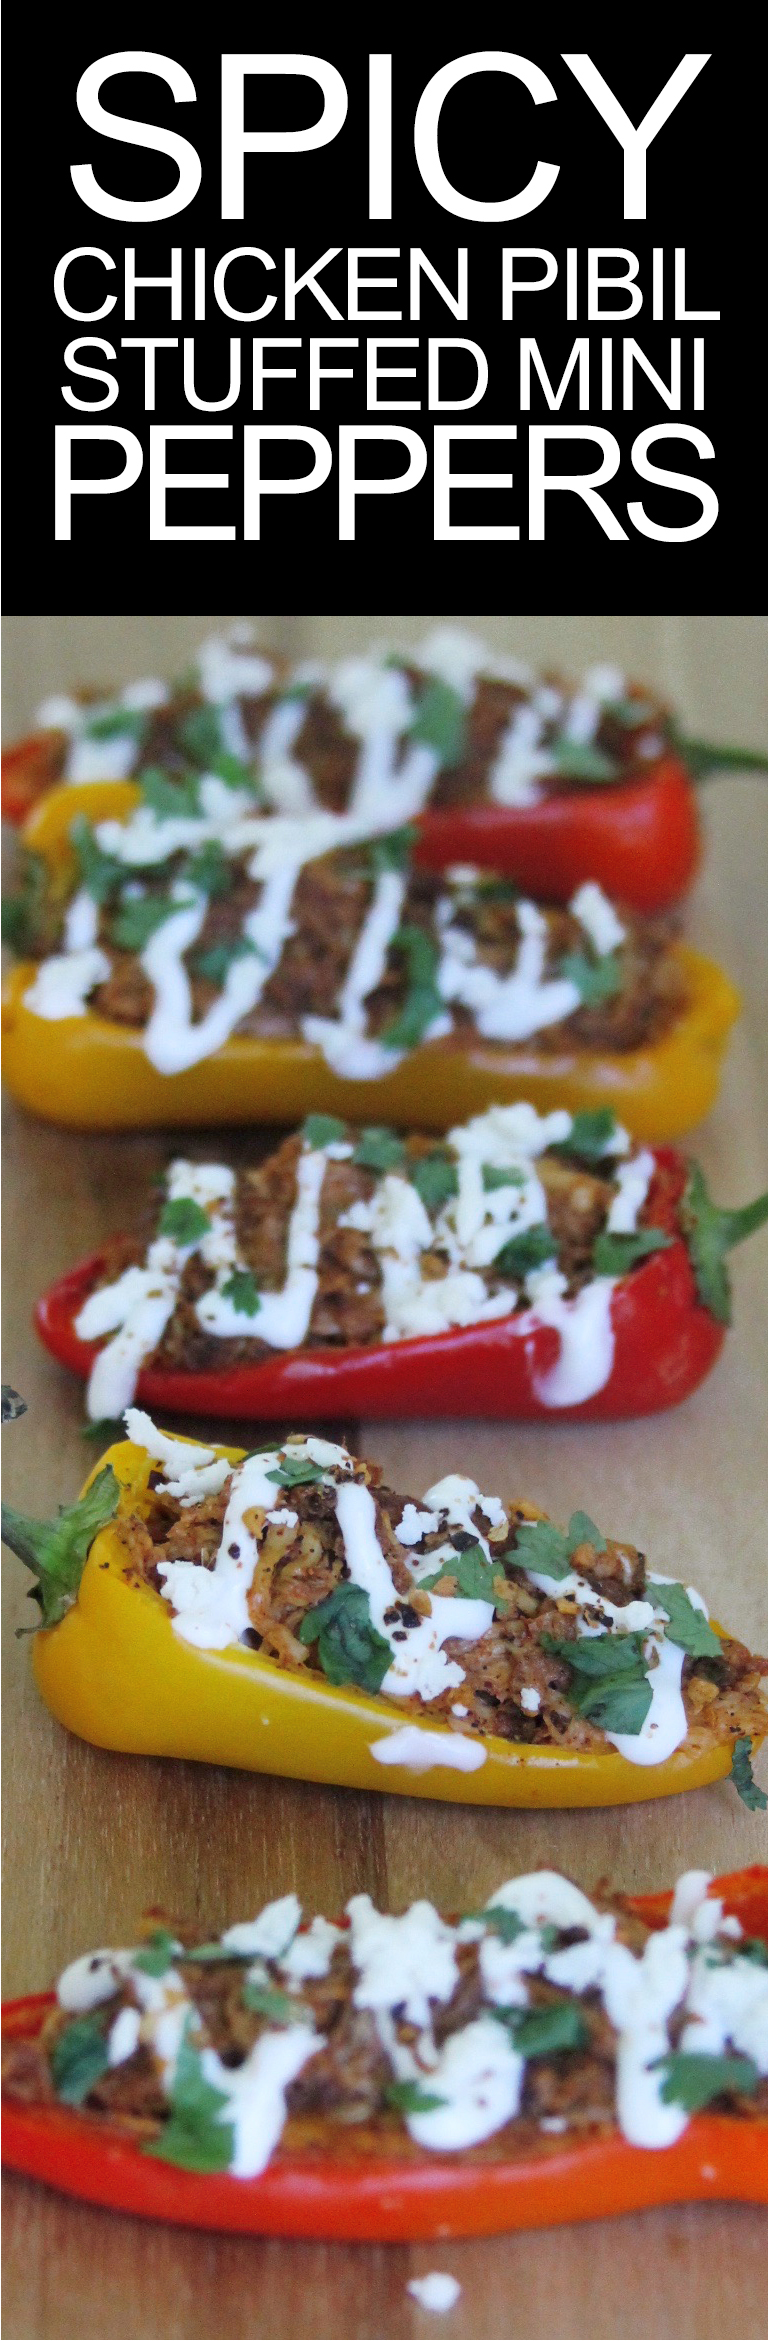 spicy chicken pibil stuffed mini peppers